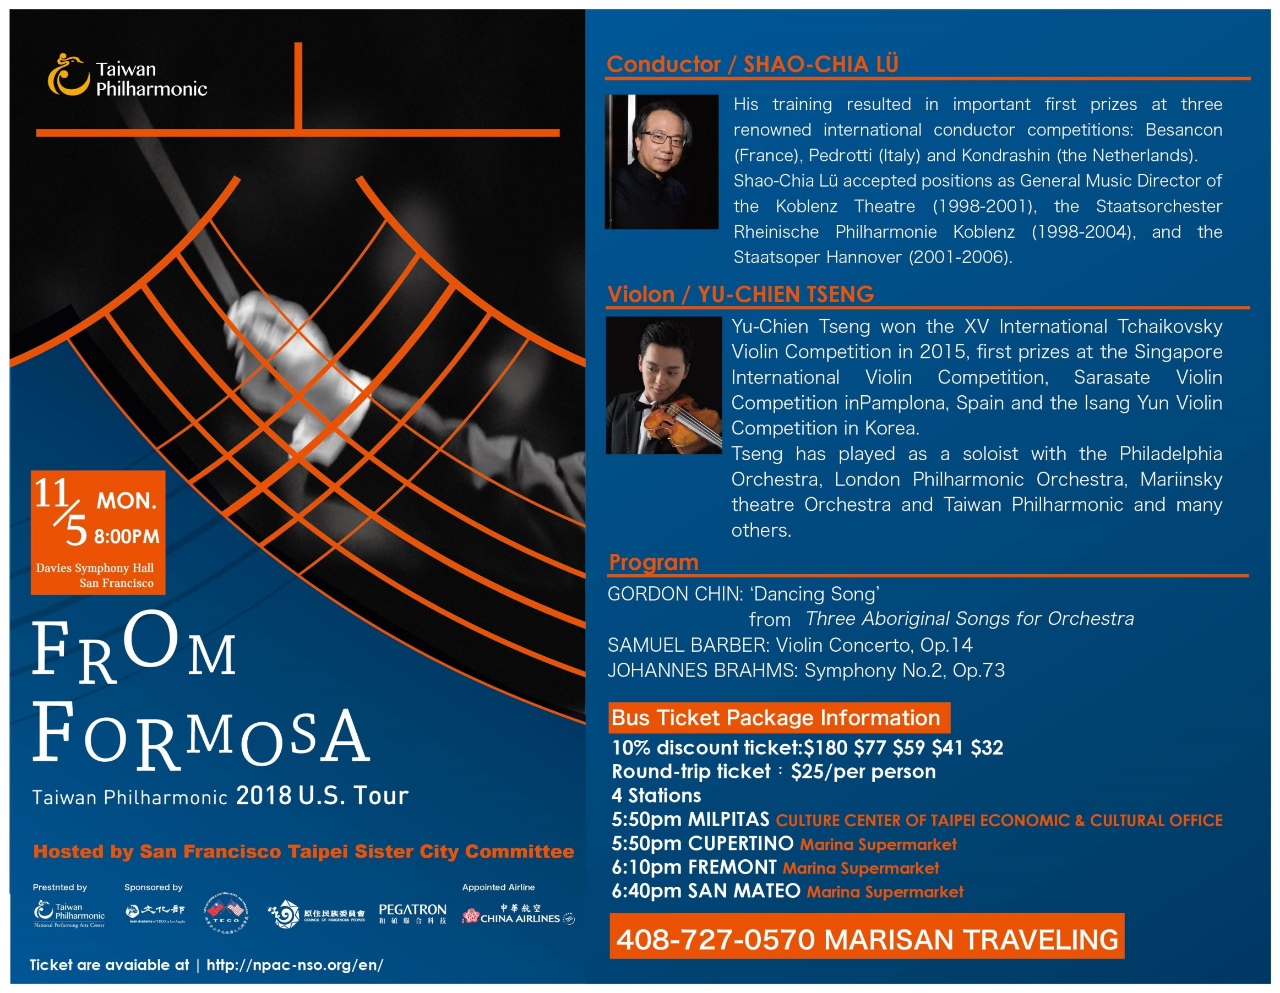 'From Formosa' — Taiwan Philharmonic to tour West Coast